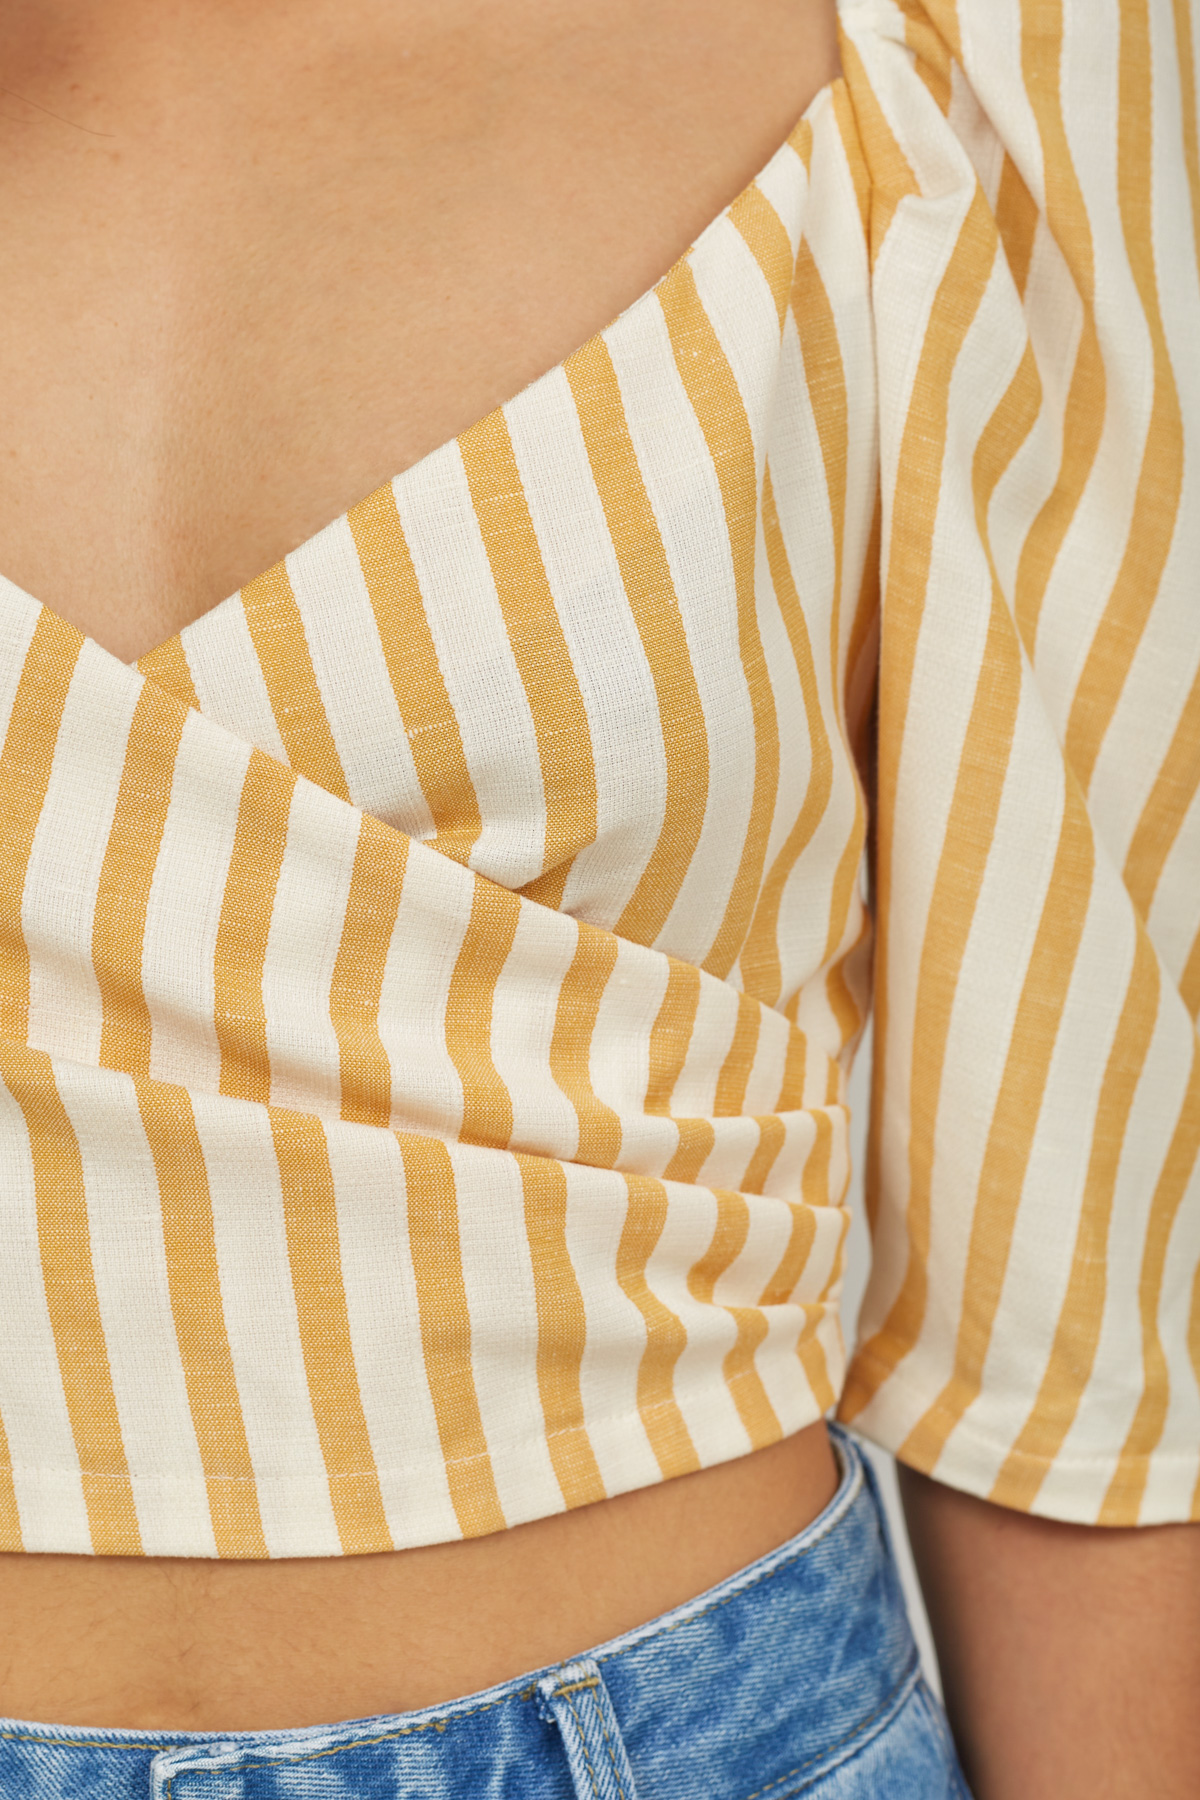 Crop top in yellow stripes, photo 3